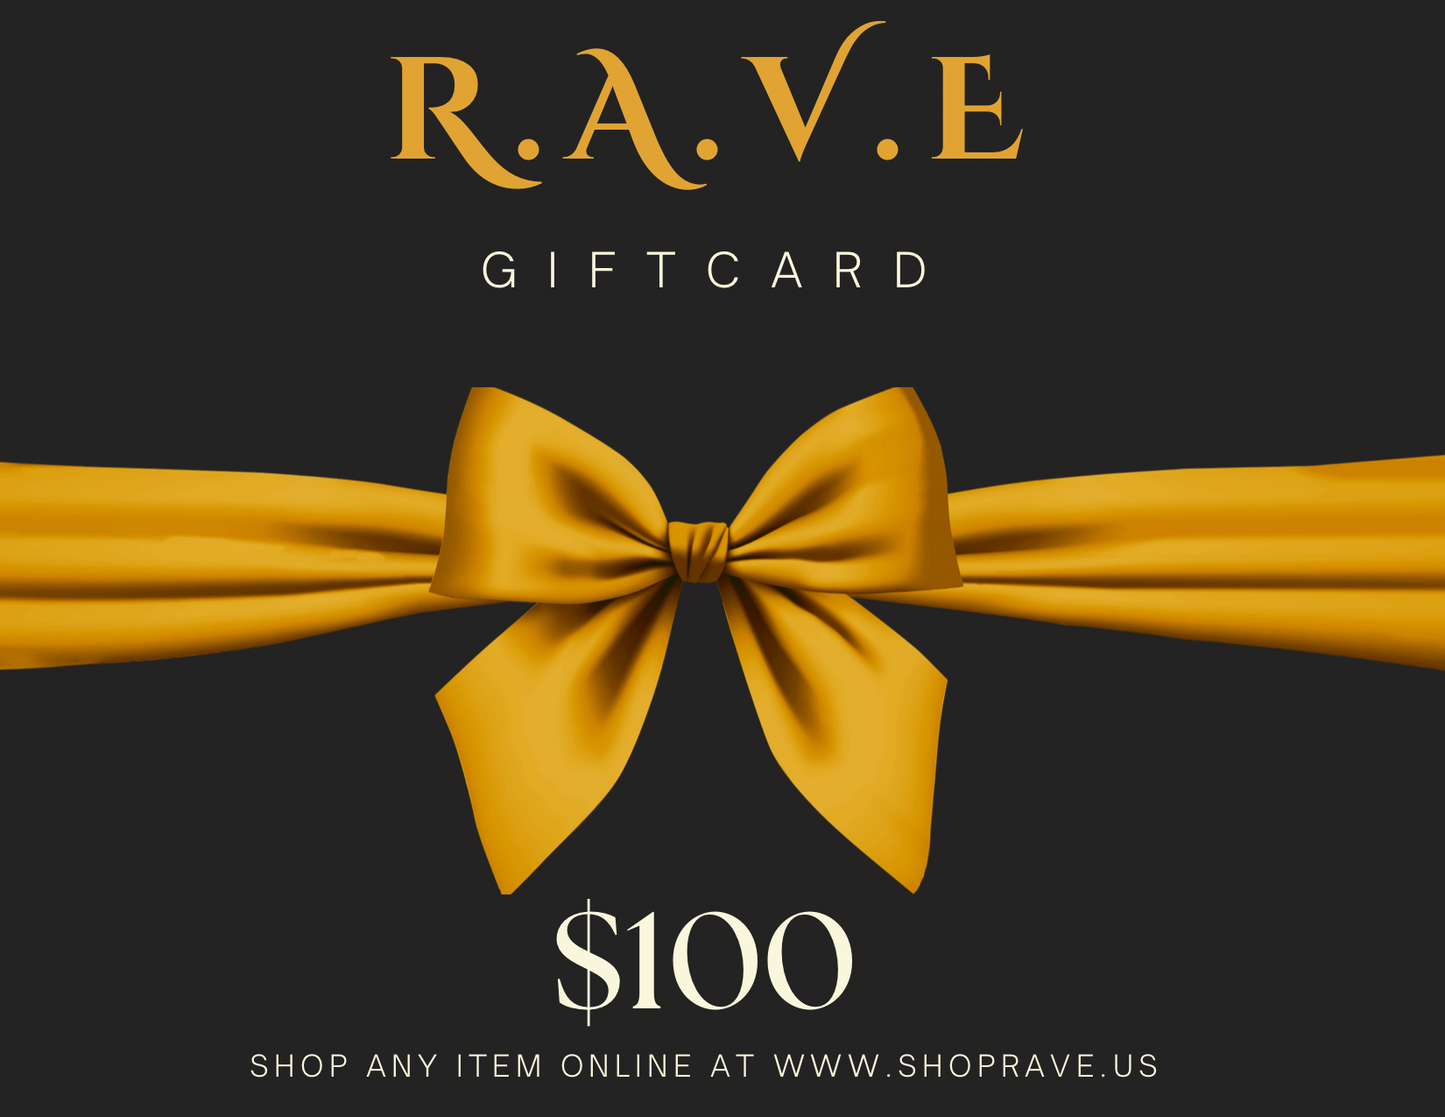 THE GIFT OF CHOICE (R.A.V.E GIFTCARD)